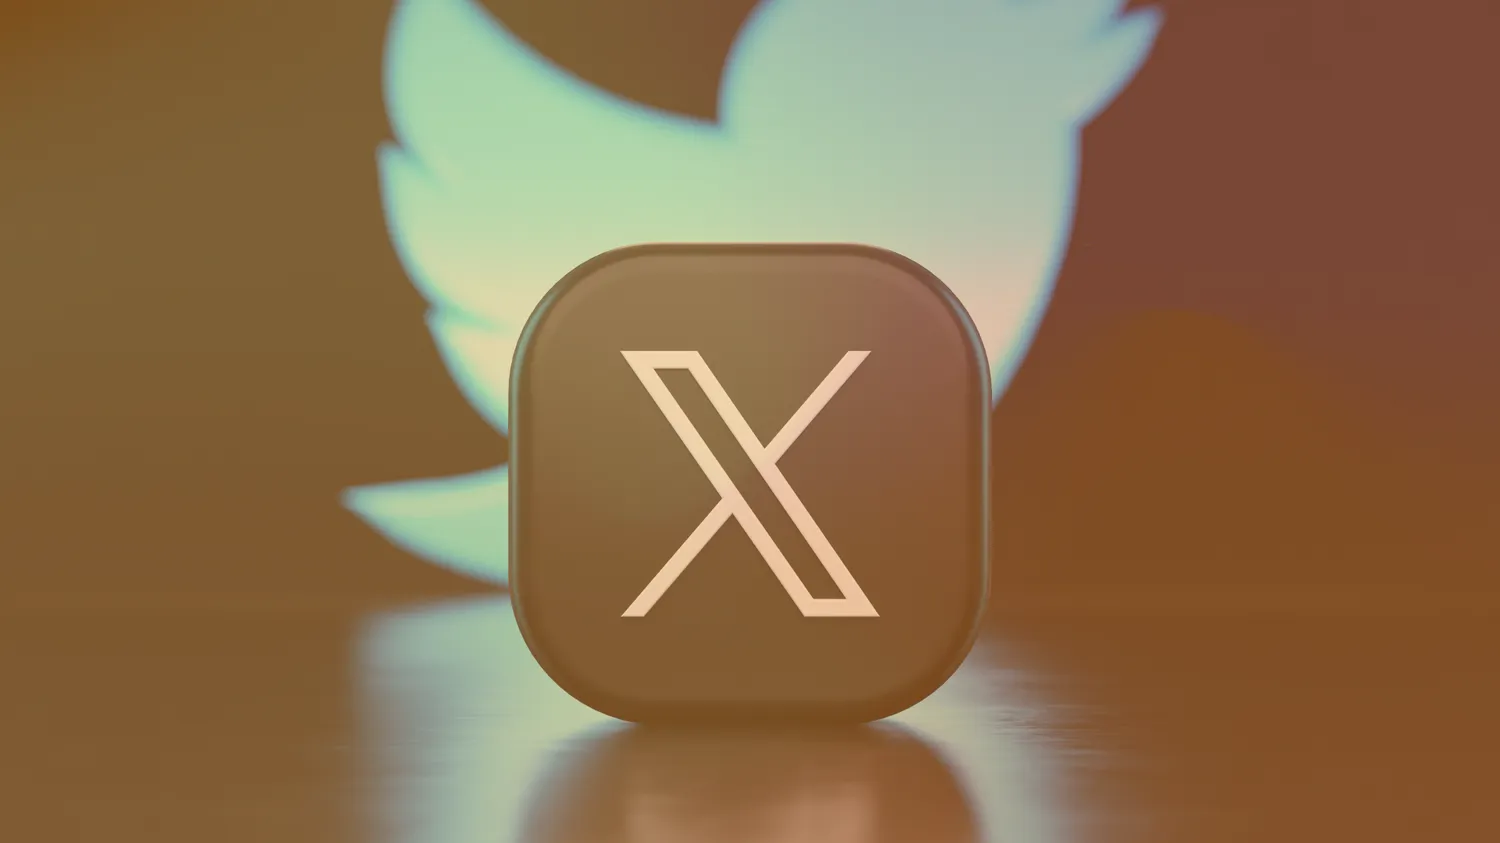 X logo with Twitter logo behind